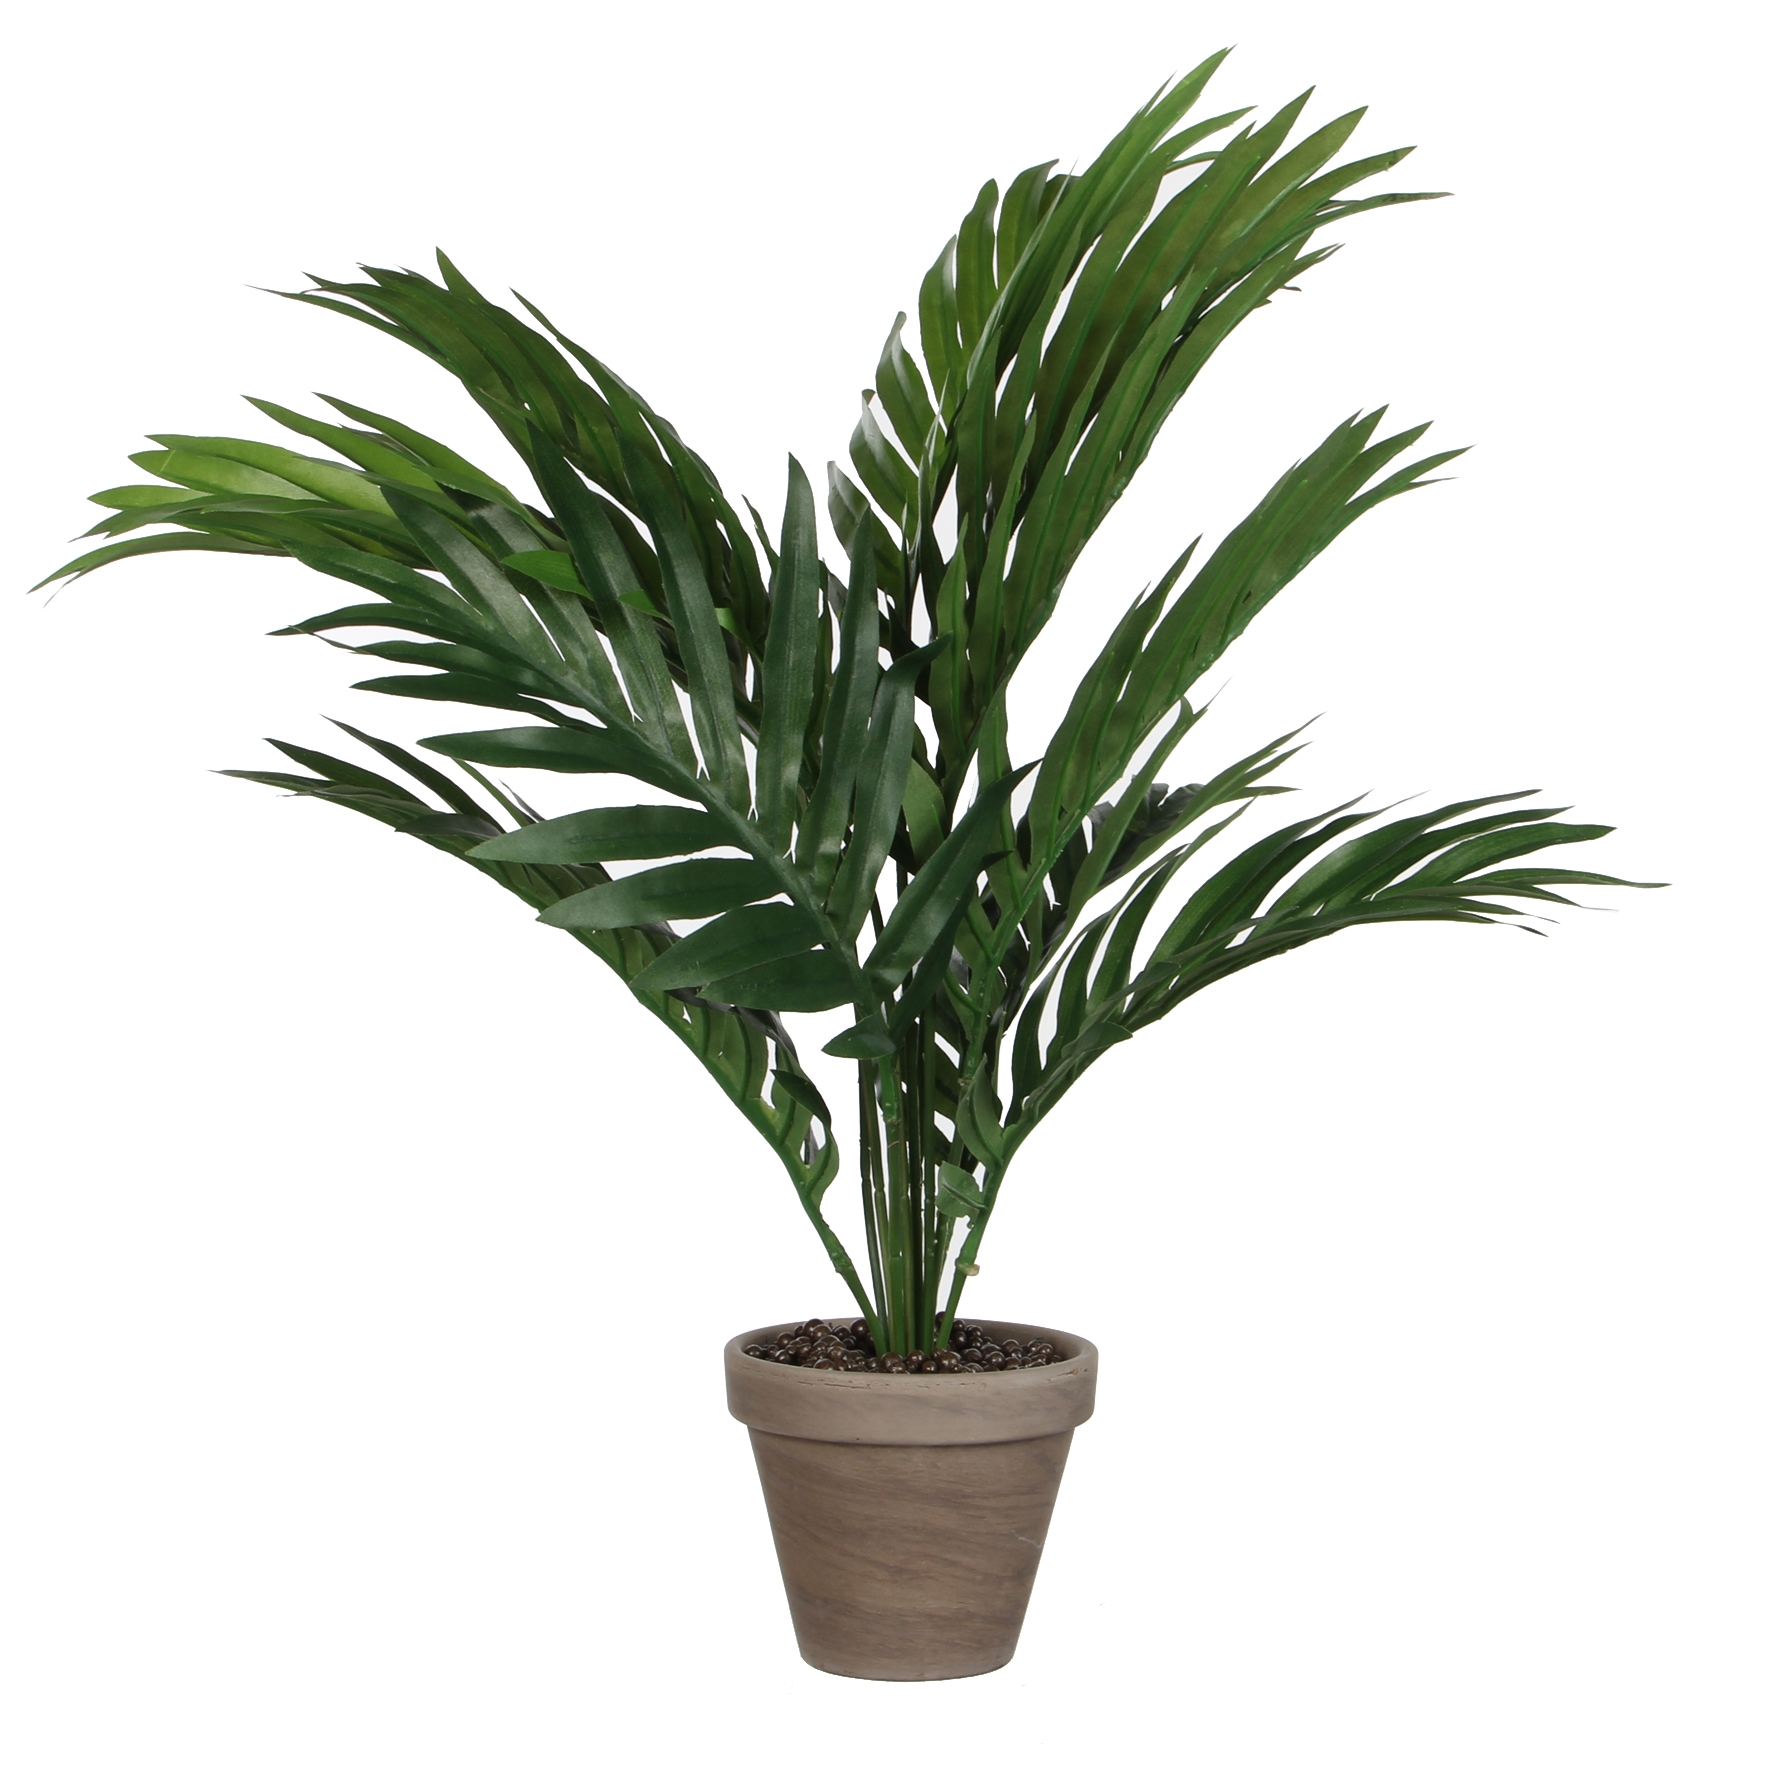 Picture of Palm Areca groen in pot 25x35 cm 